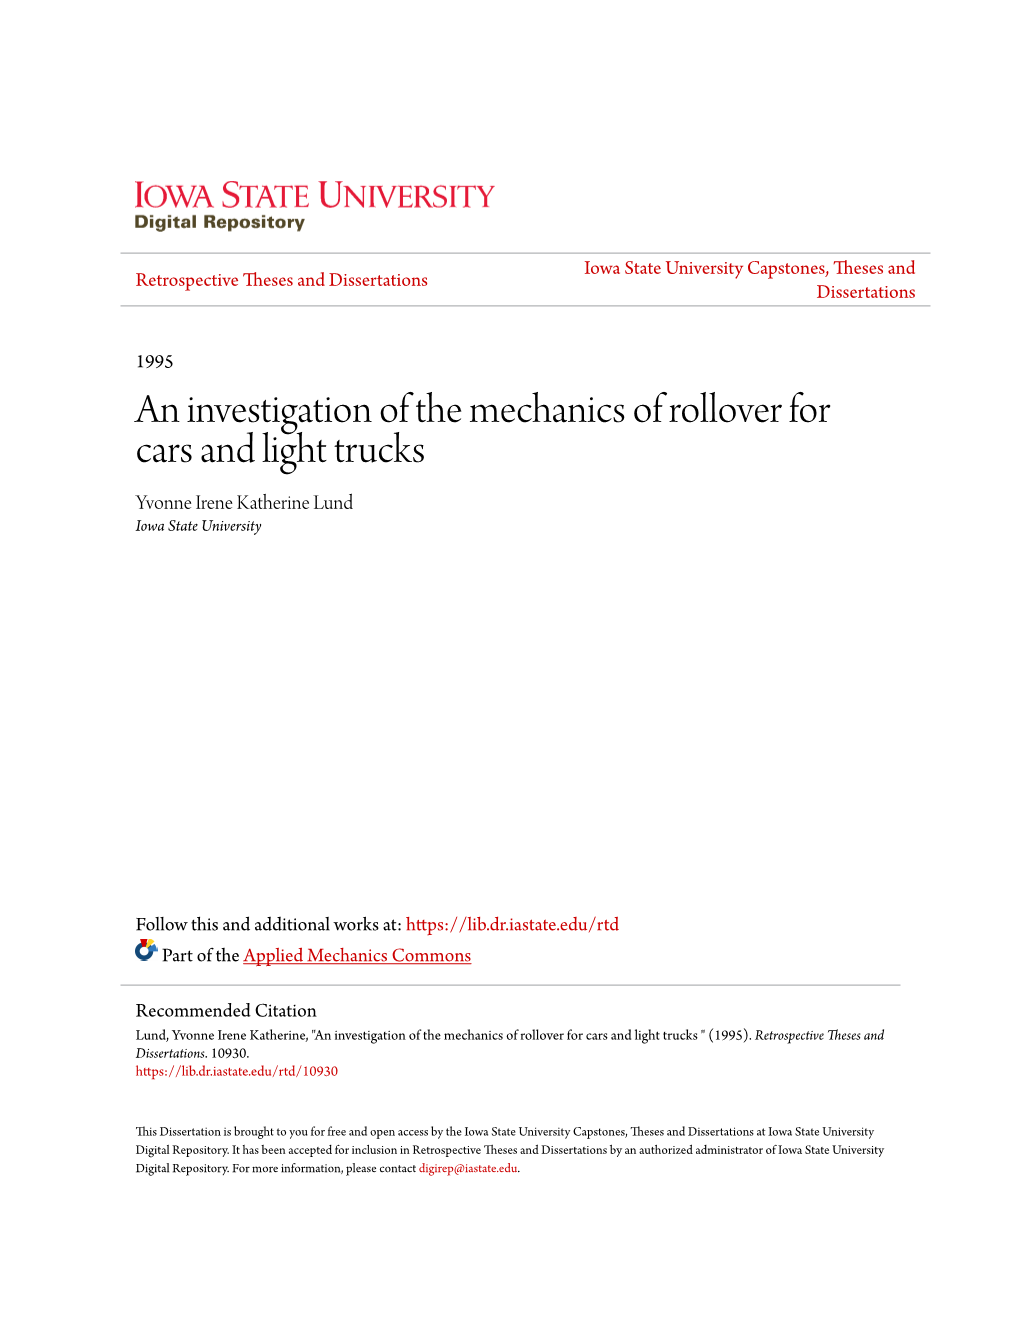 An Investigation of the Mechanics of Rollover for Cars and Light Trucks Yvonne Irene Katherine Lund Iowa State University